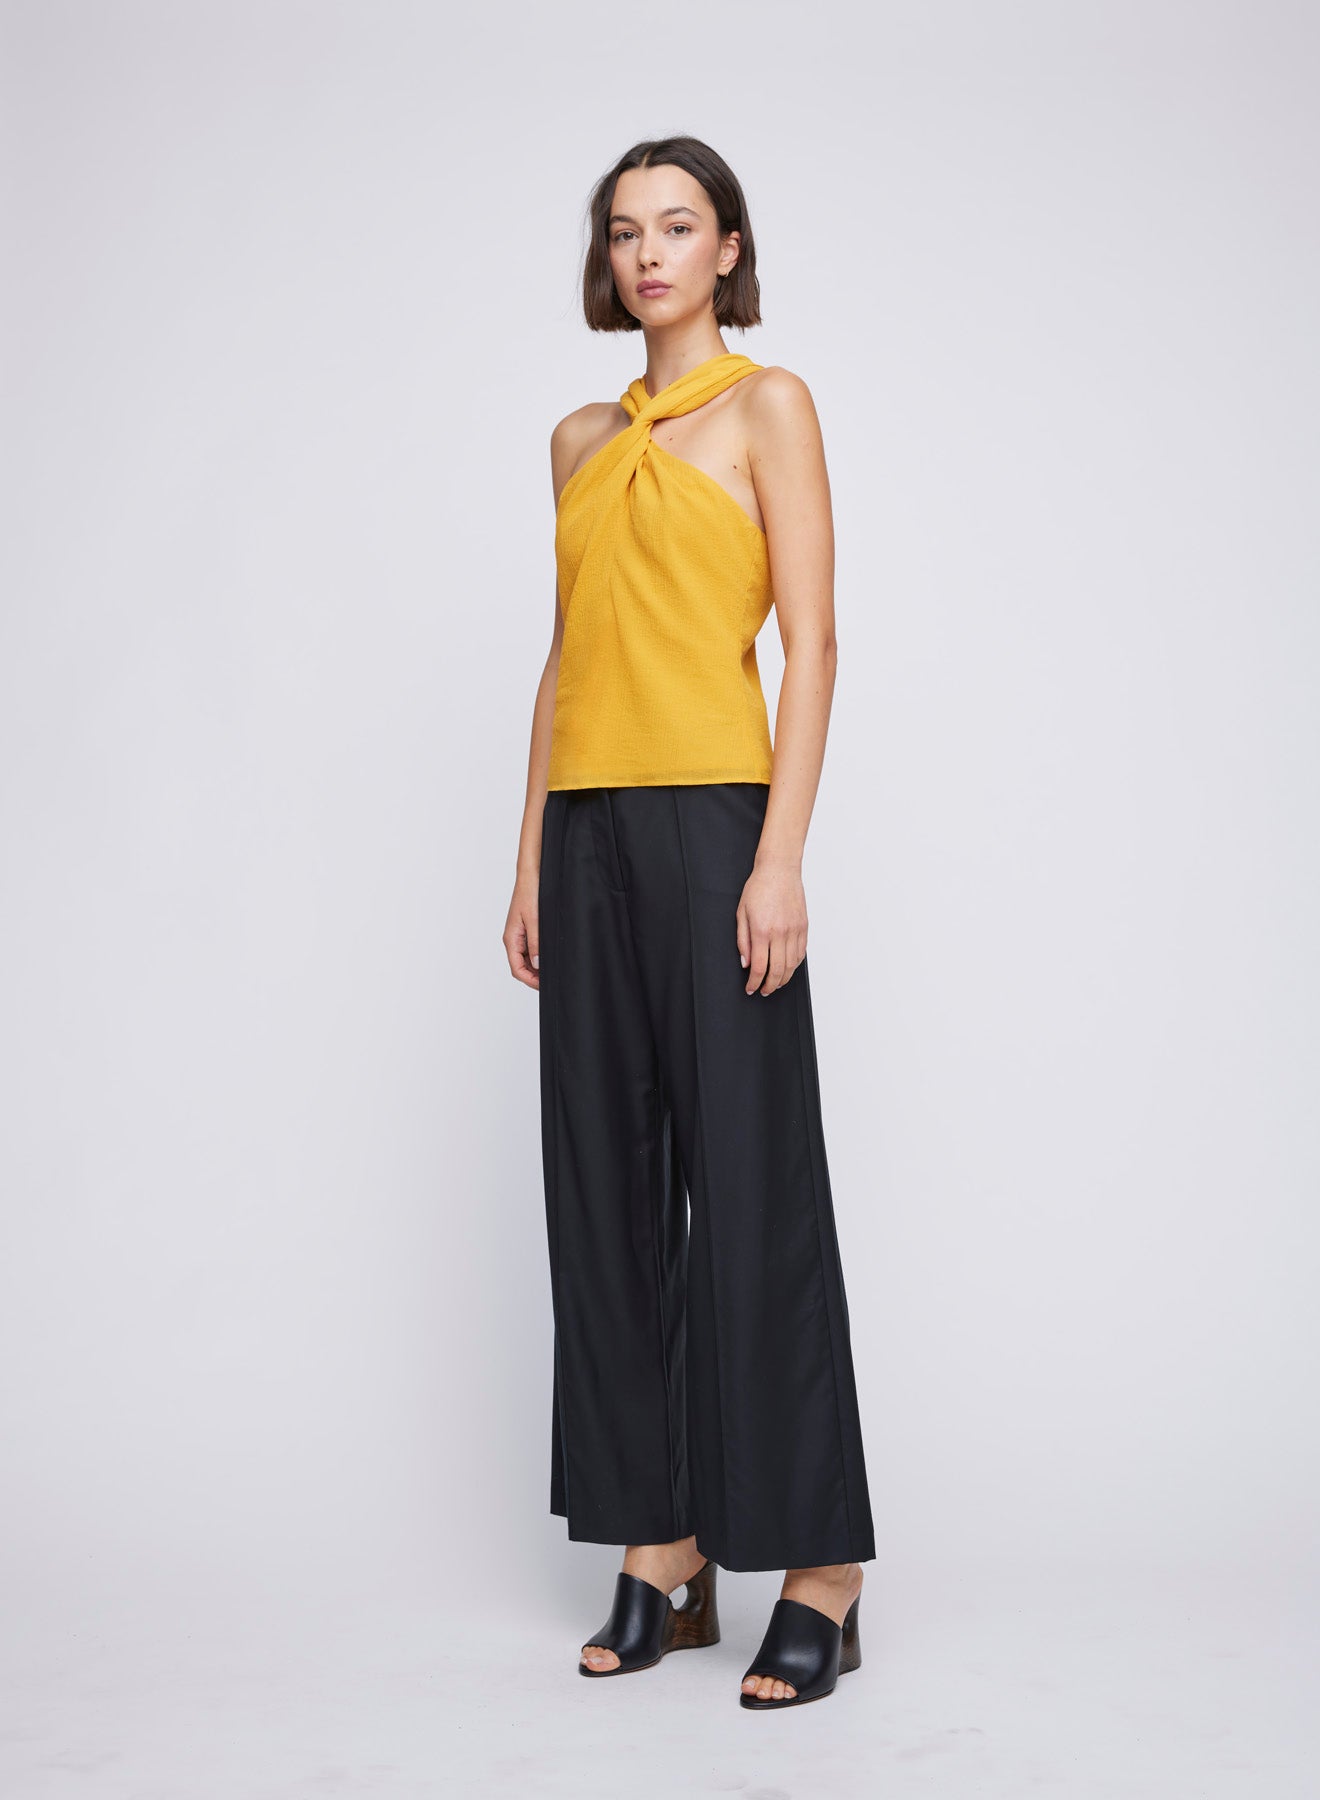 ANNA QUAN Halter Top in textured woven suiting fabric. Halter neckline, shaped waist seam, fully lined. Ideal for a versatile day-to-night look.